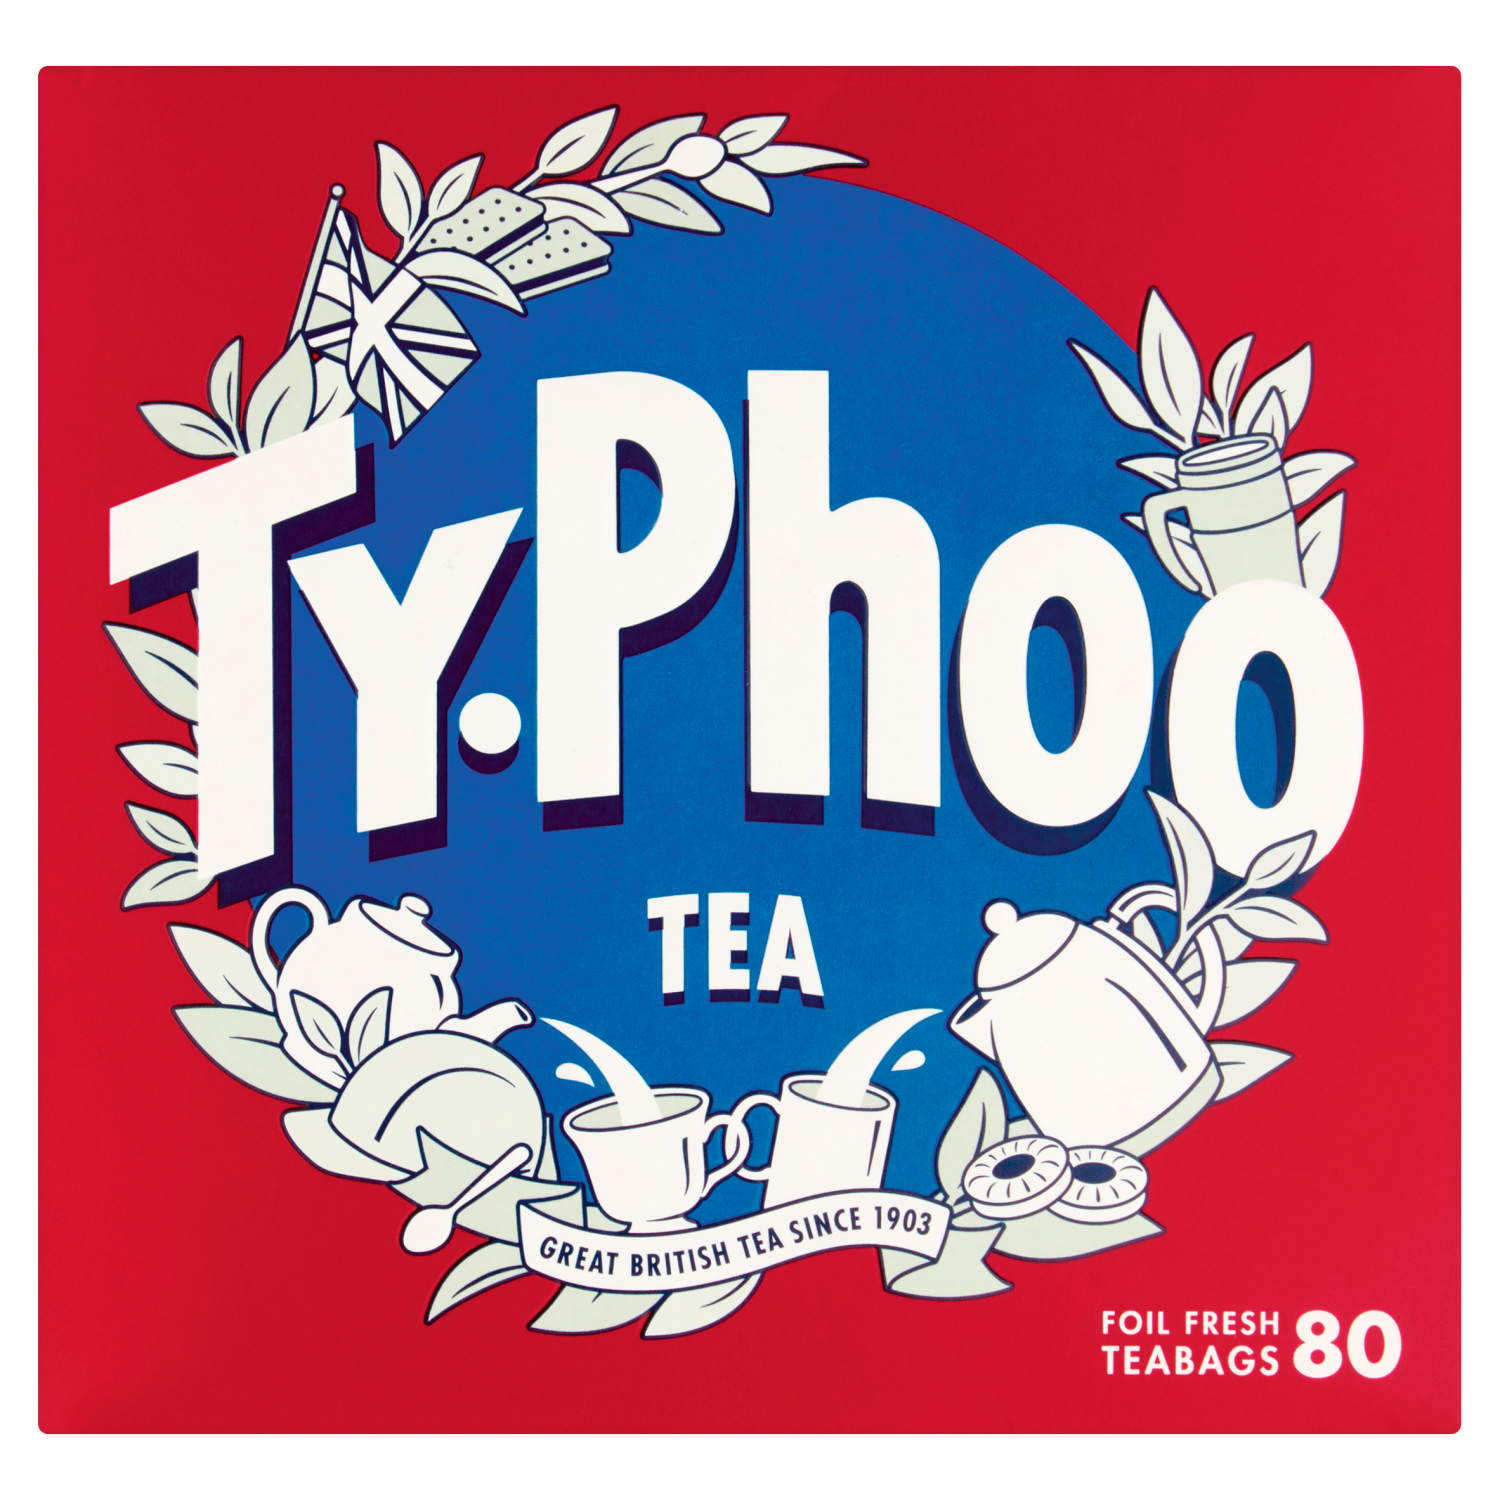 Typhoo Tea Ltd secures significant new investment